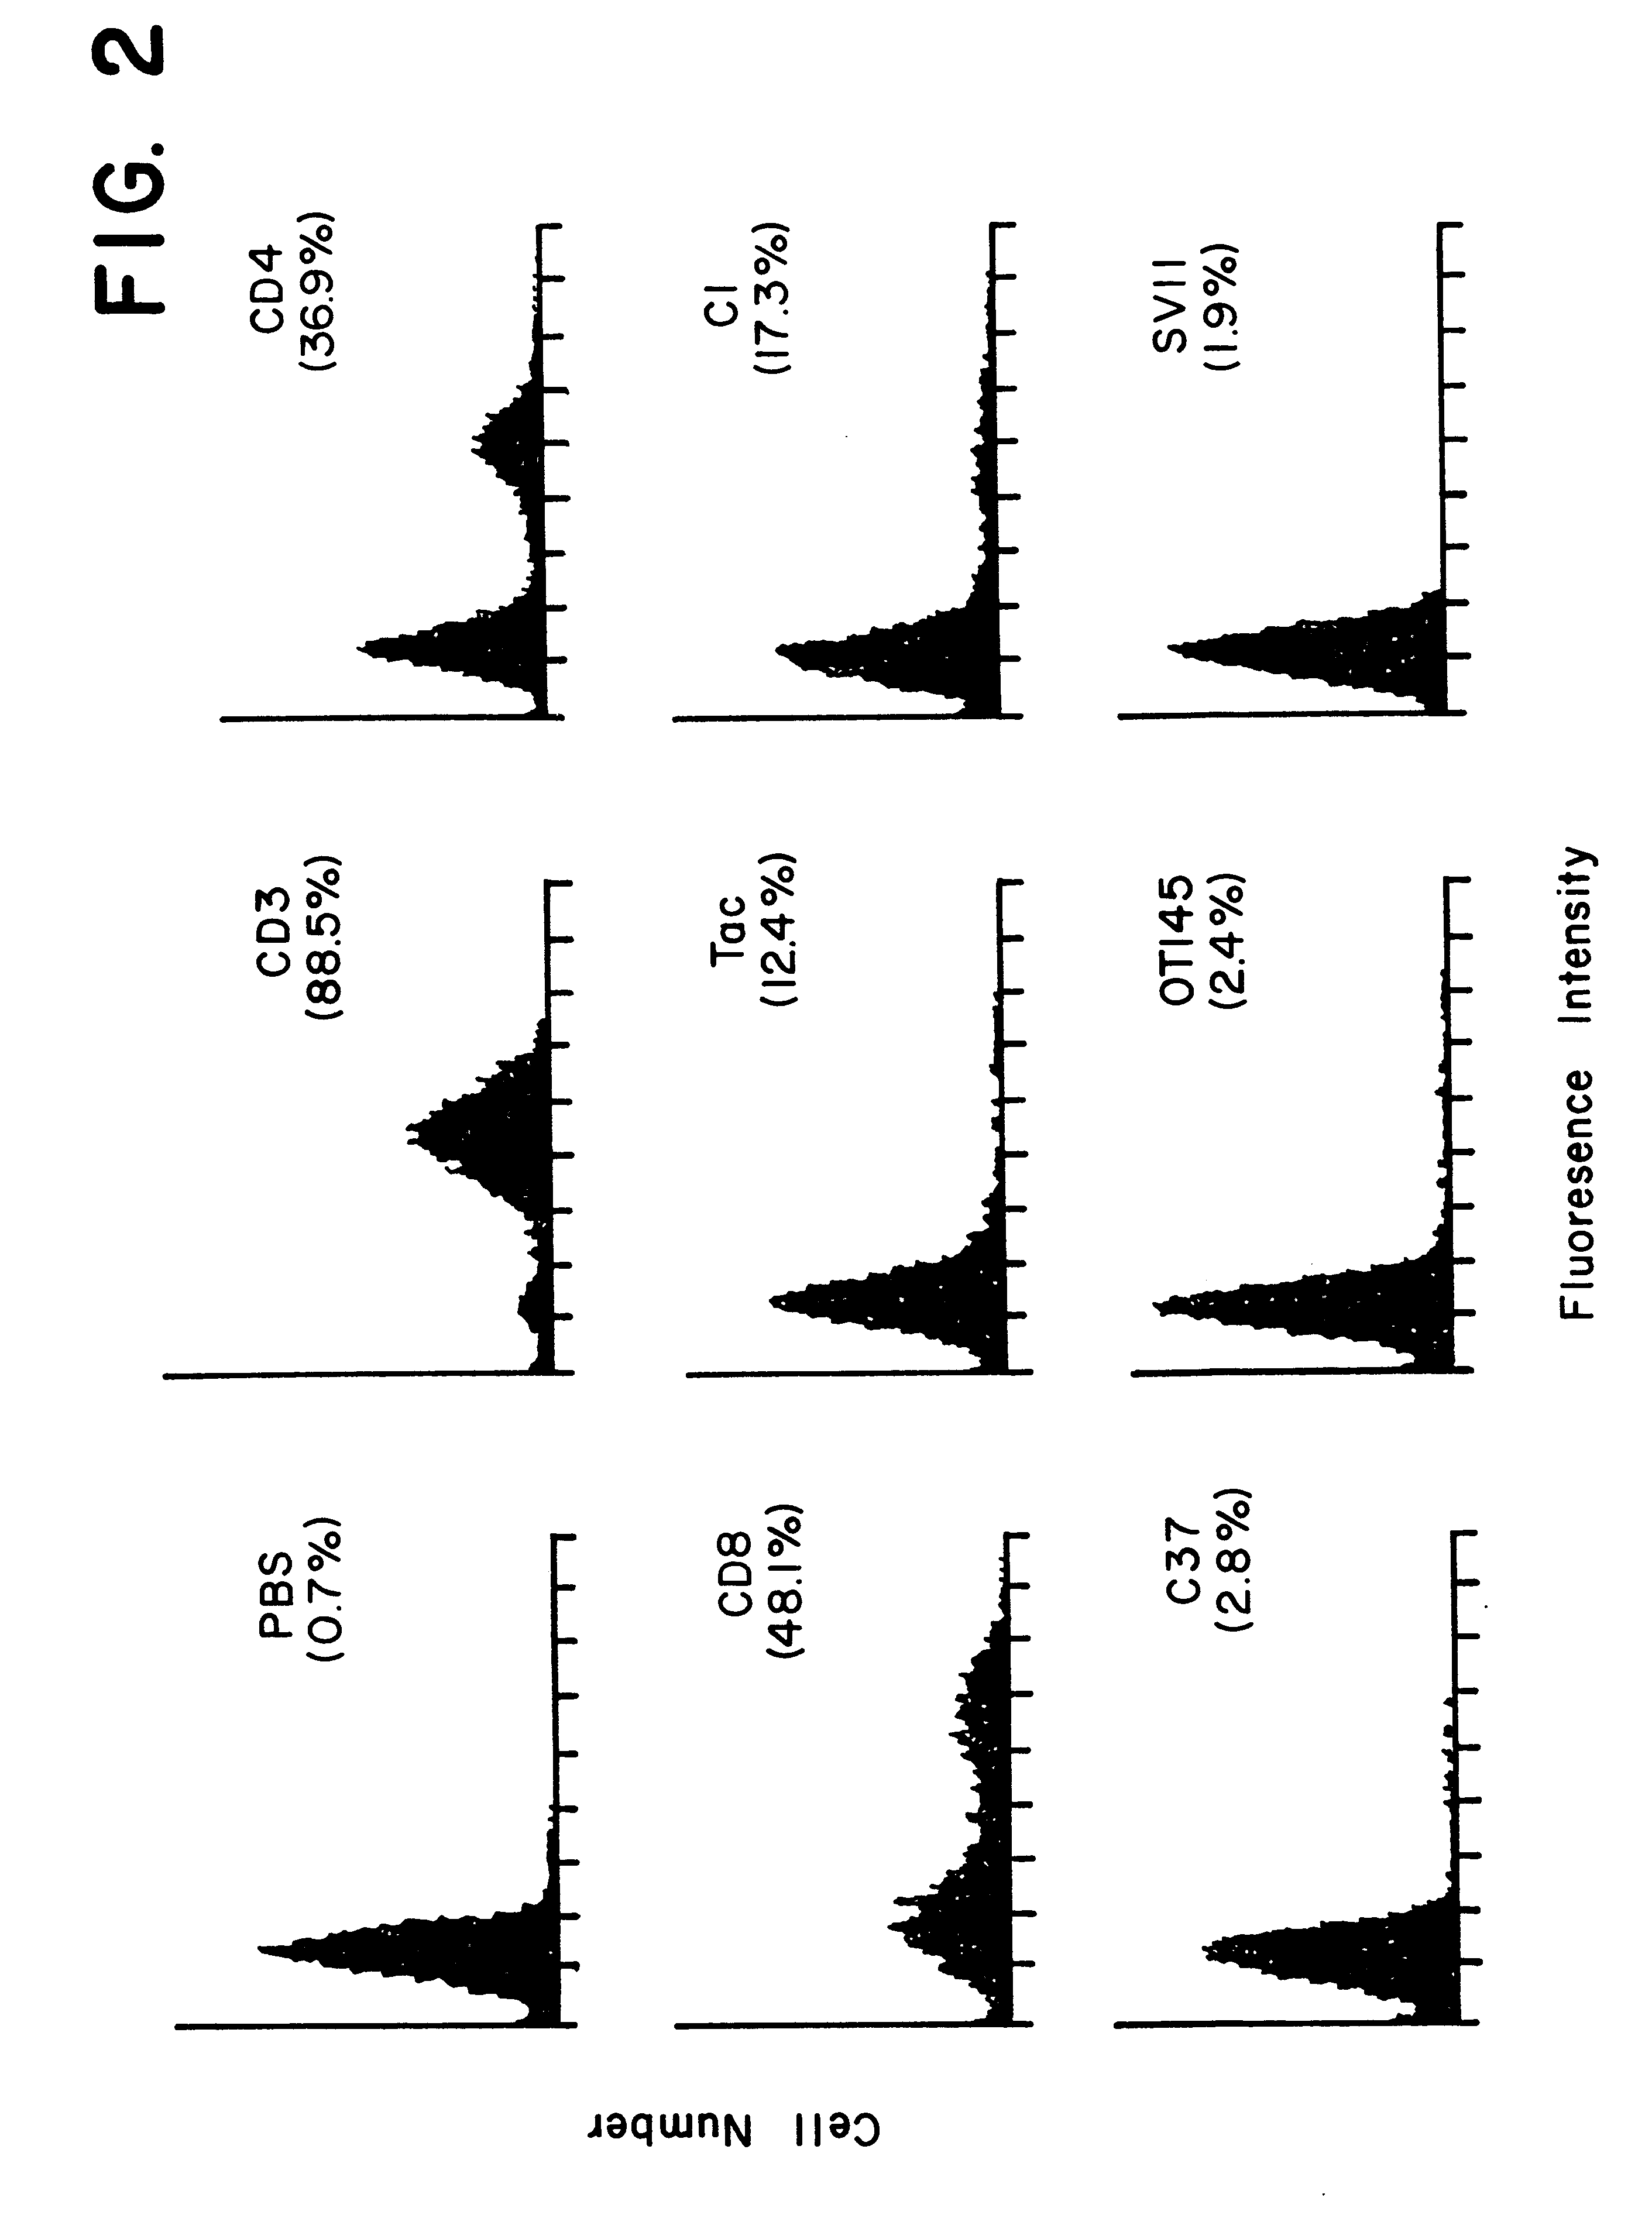 Conserved T-cell receptor sequences